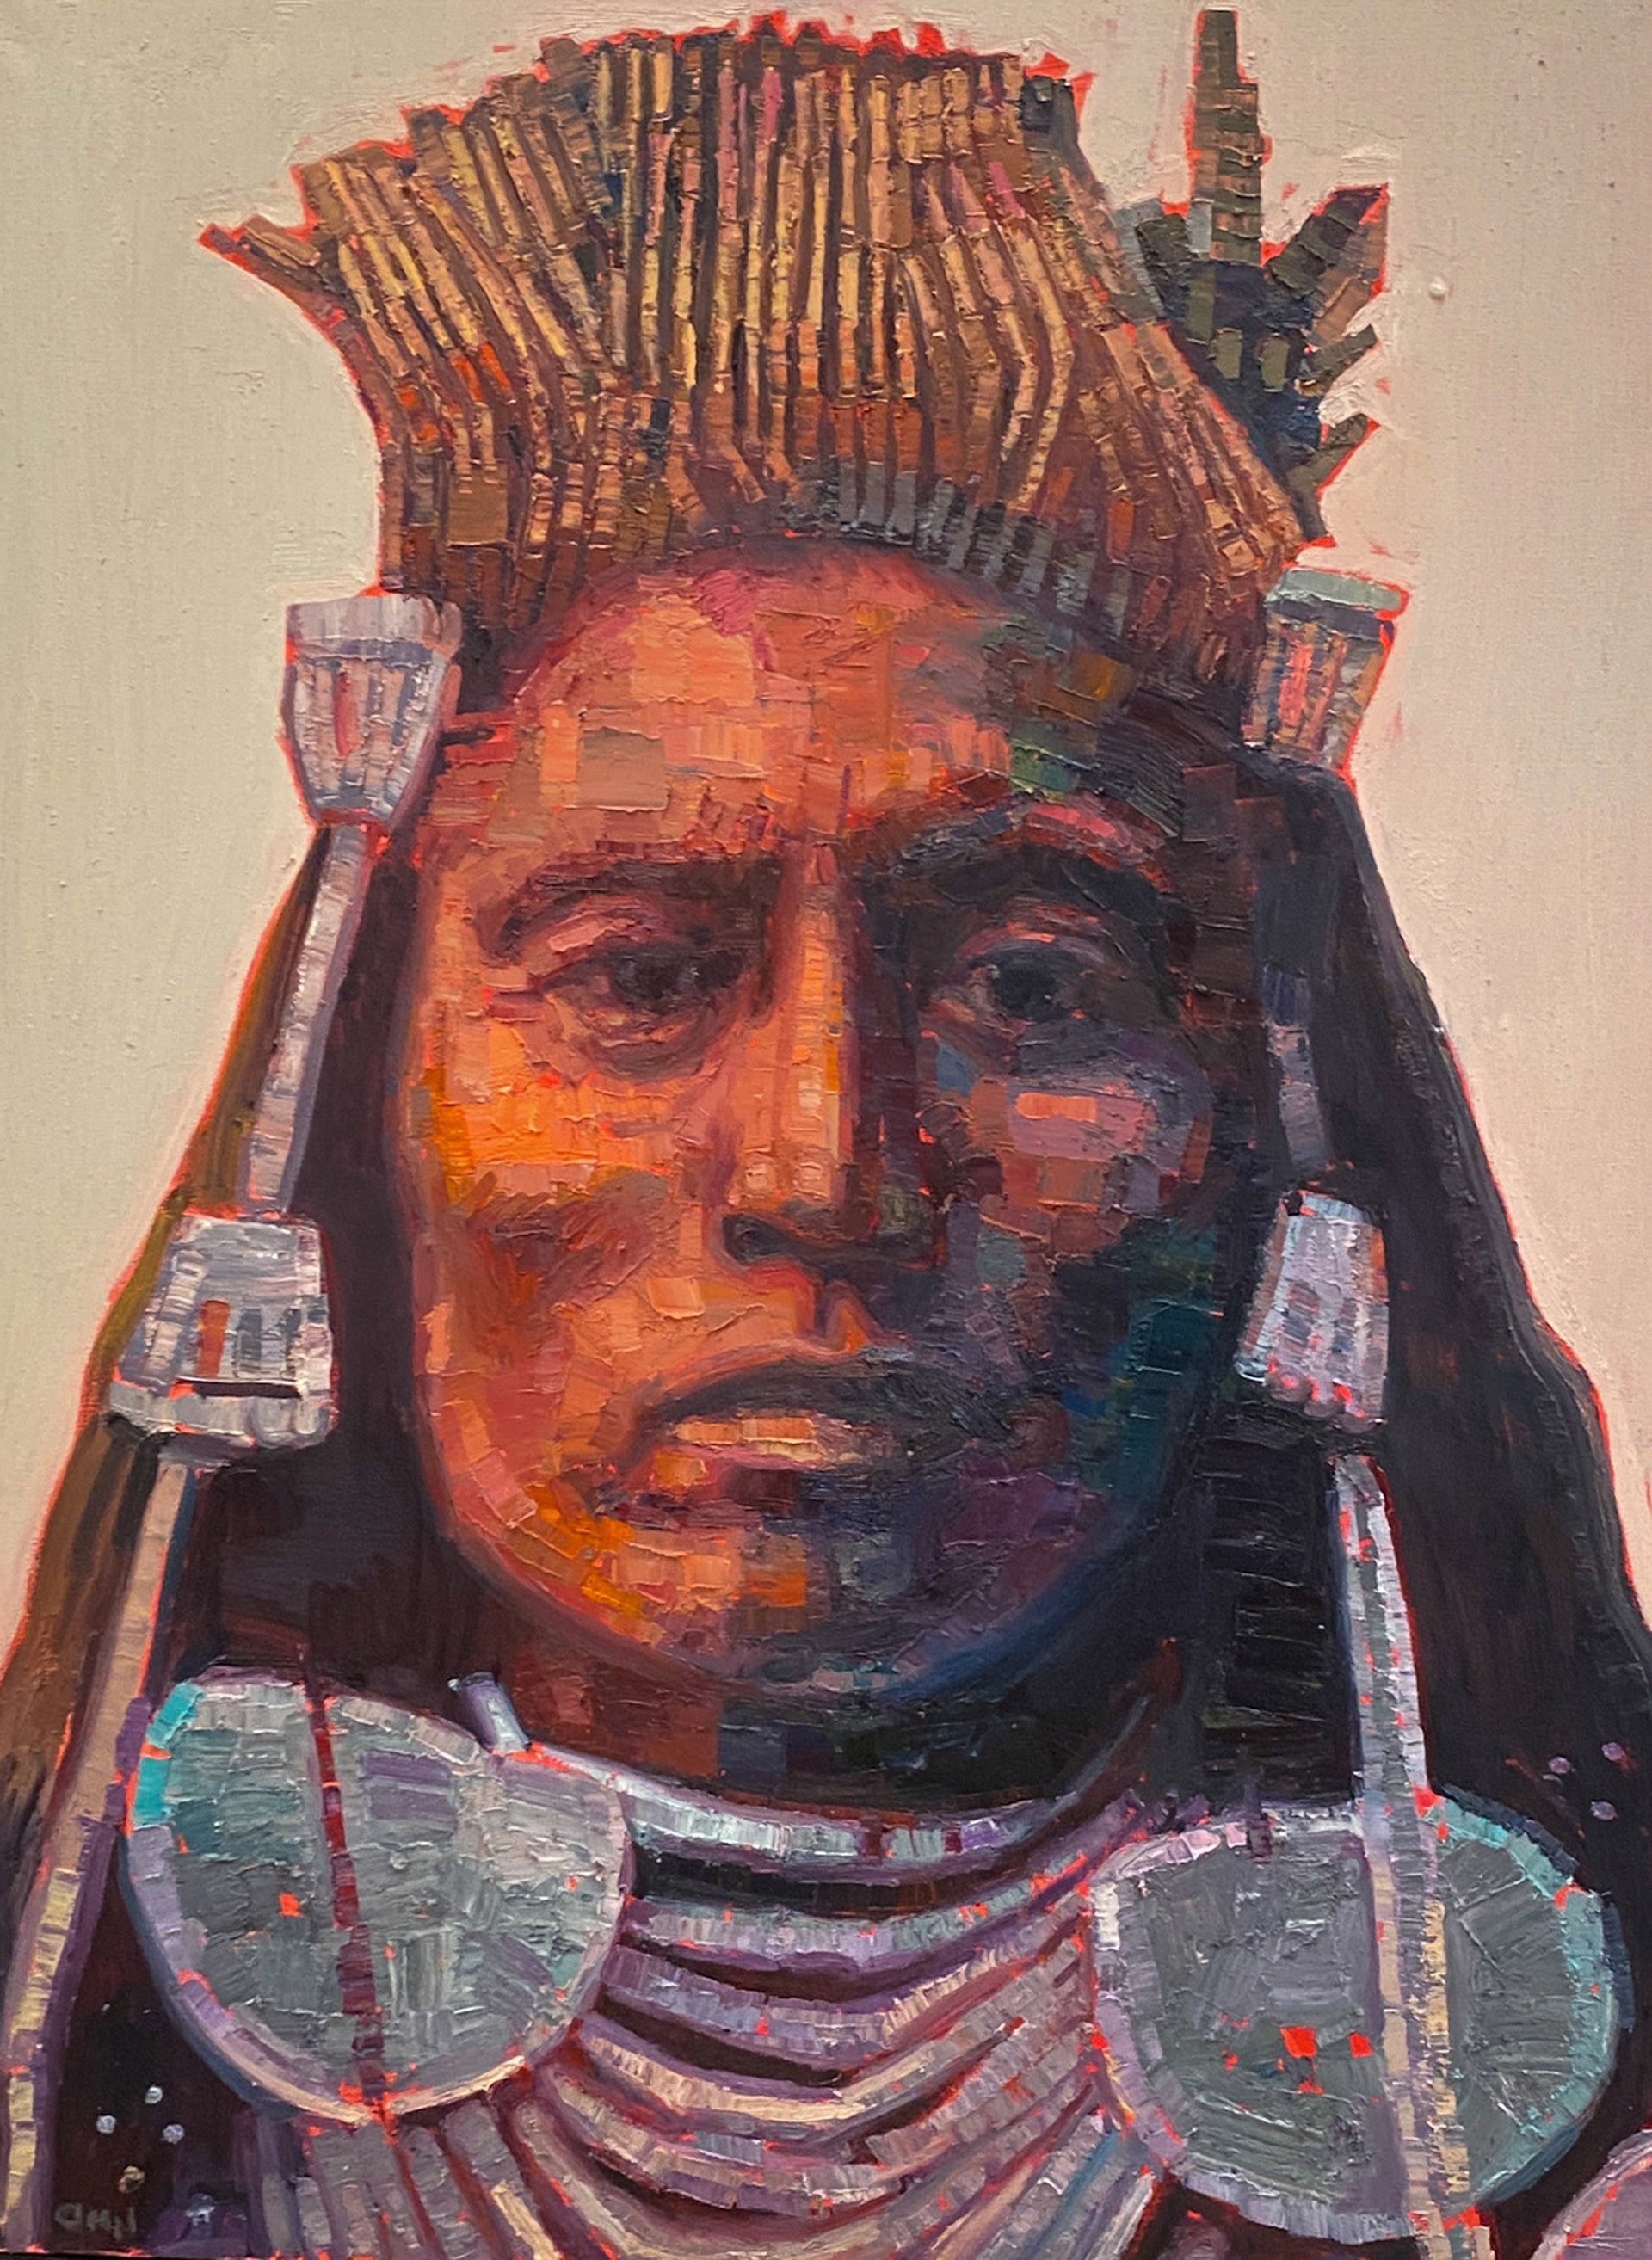 Palette Knife Oil Painting Of A Portrait Of A Medicine Crow By Aaron Hazel